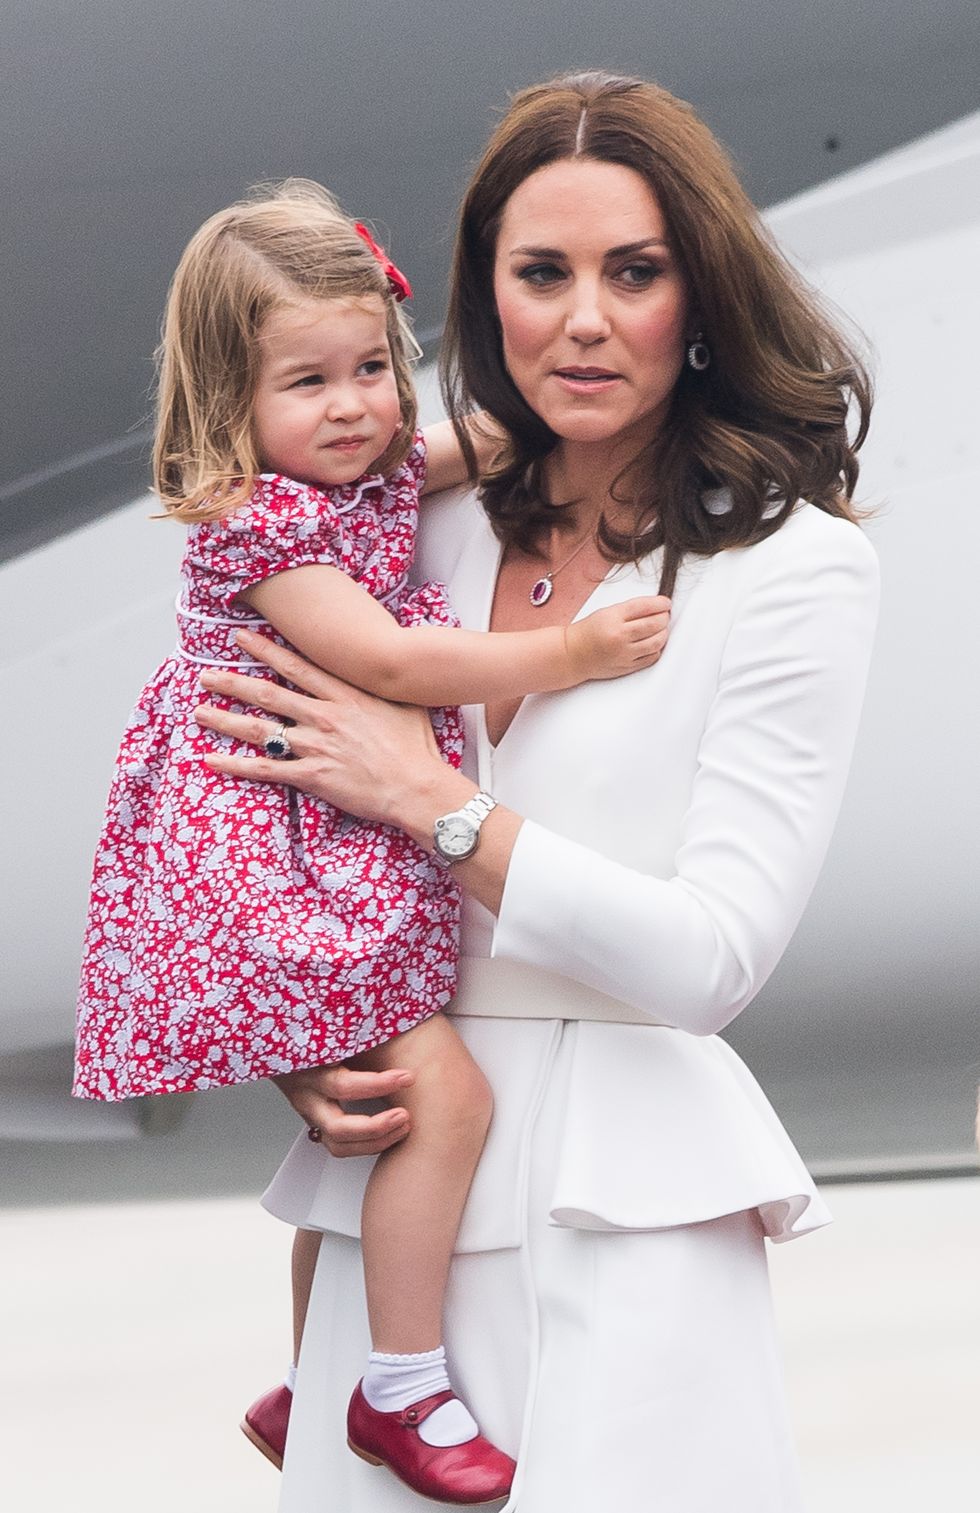 Catherine, Duchess of Cambridge, Princess Charlotte of Cambridge arrive at Warsaw airport during an official visit to Poland and Germany on July 17, 2017 in Warsaw, Poland.